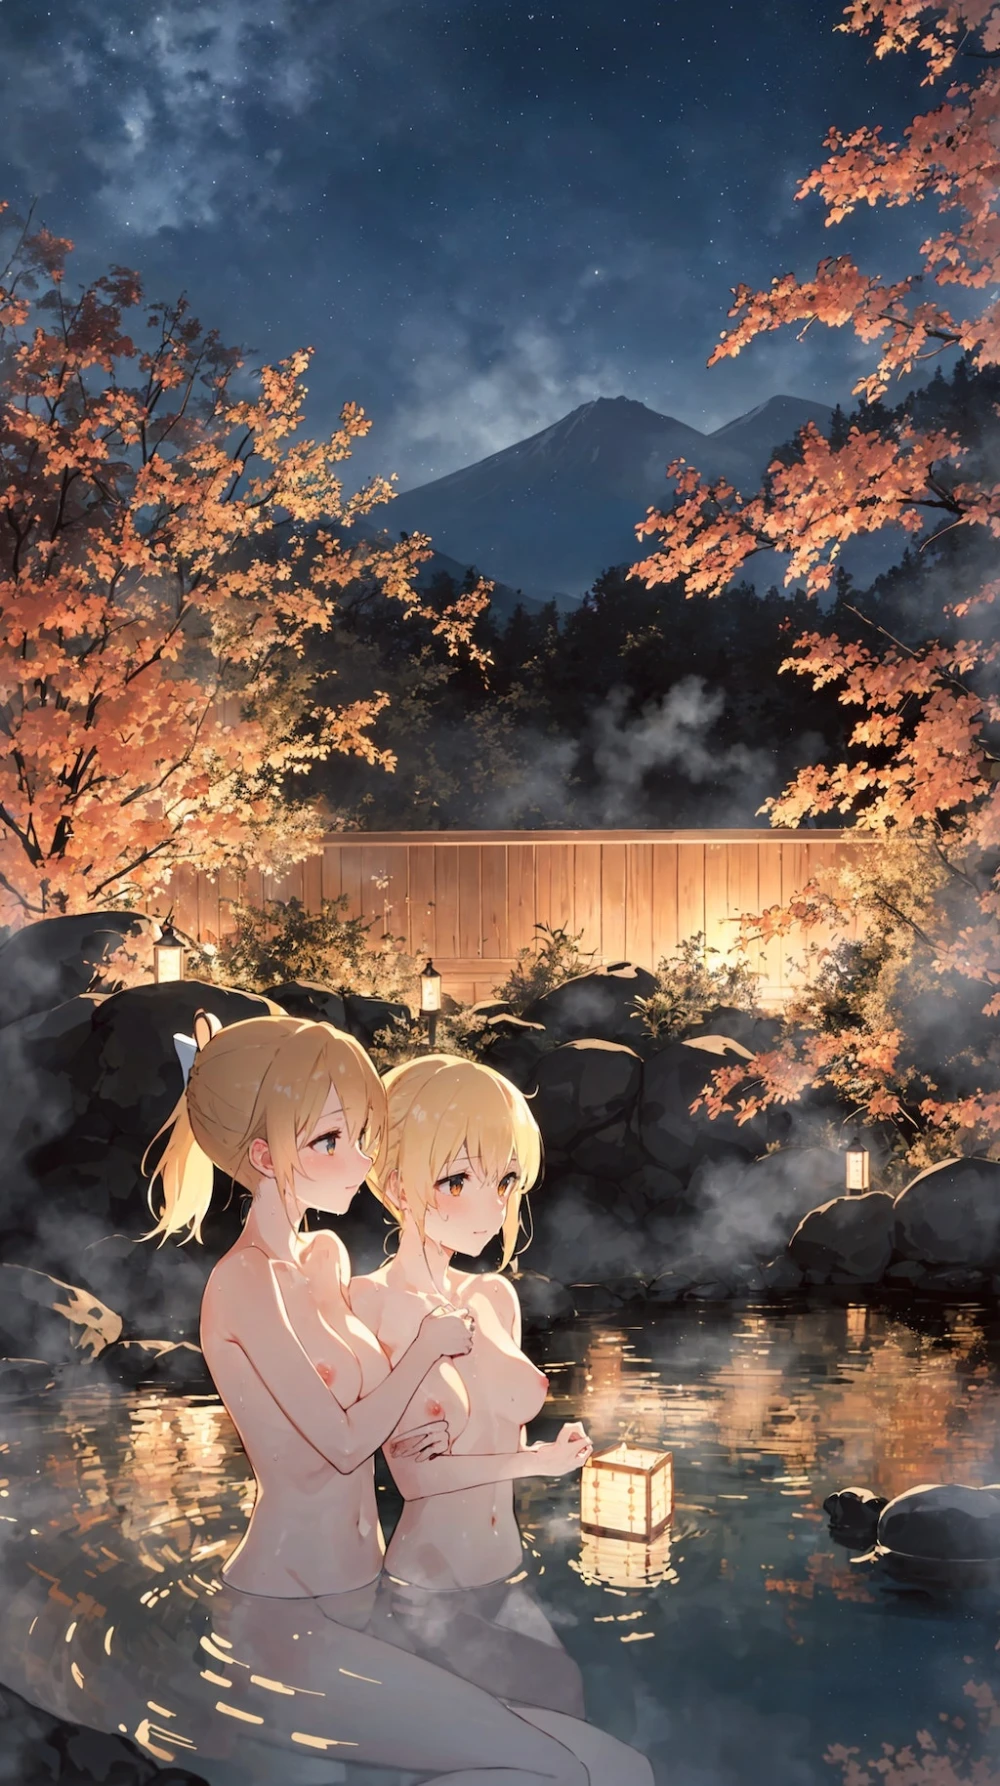 onsen-anime-style-adults-only-2-19